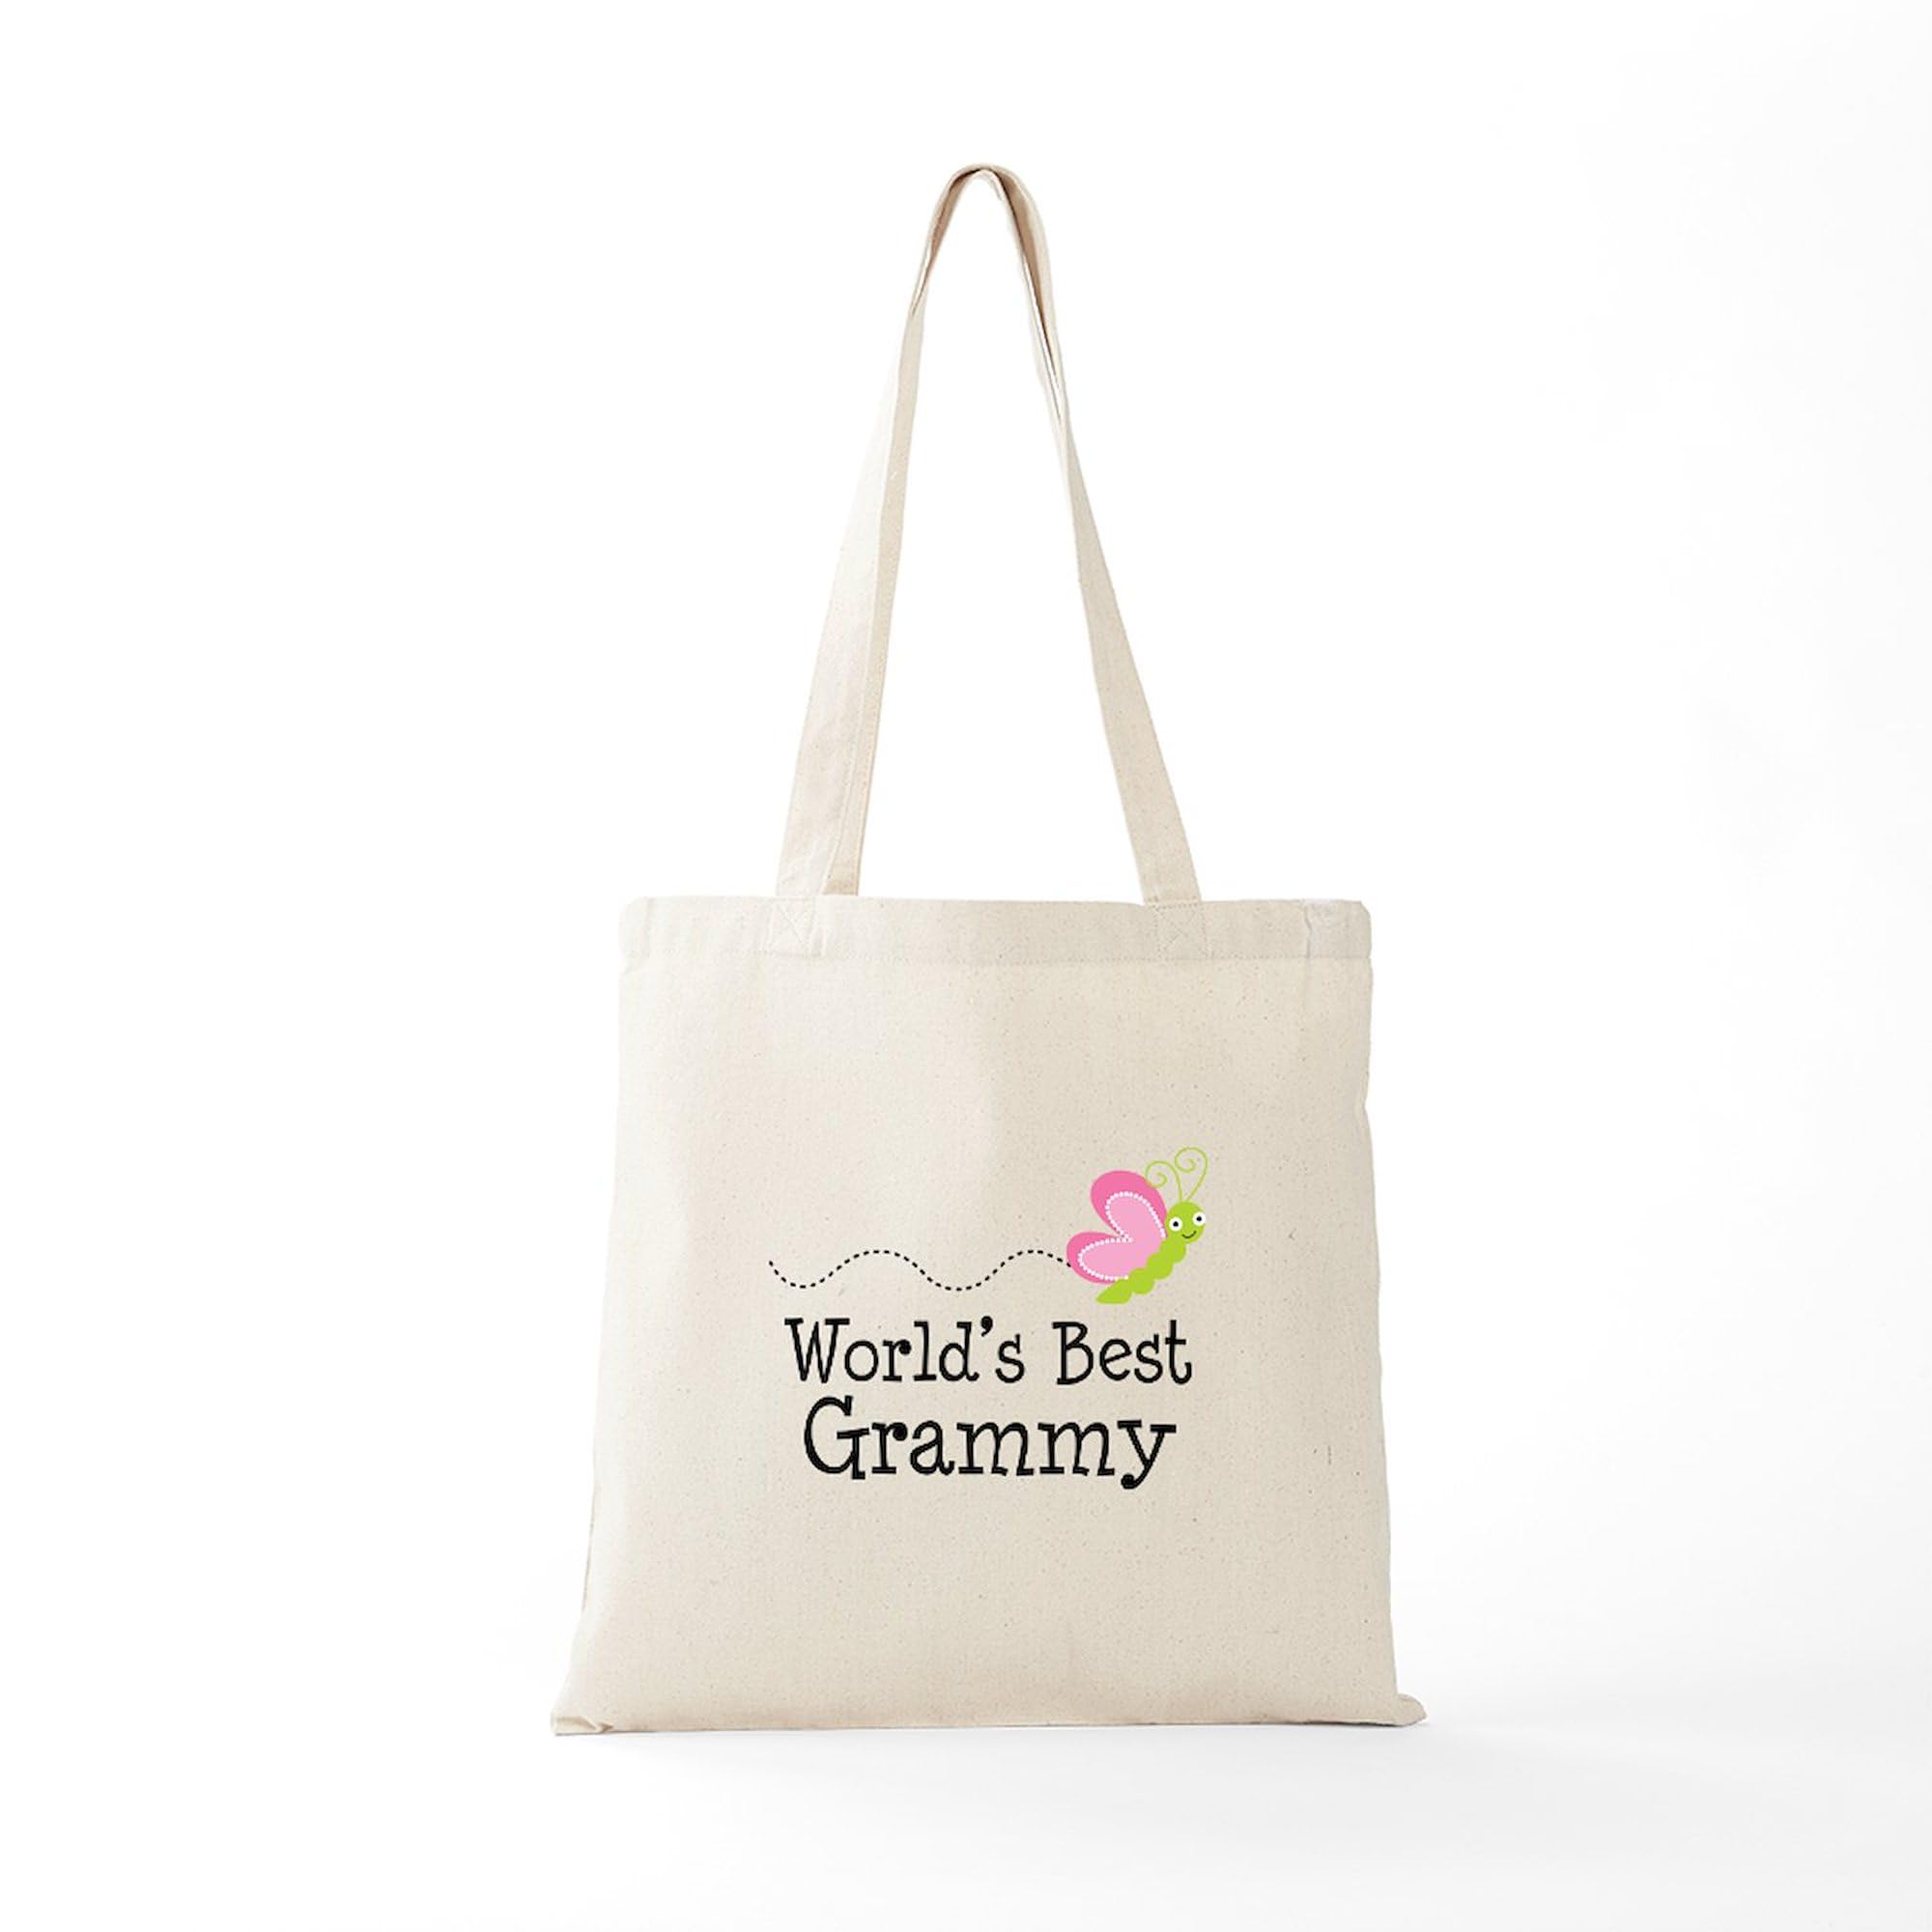 CafePress World's Best Grammy Tote Bag Canvas Tote Shopping Bag